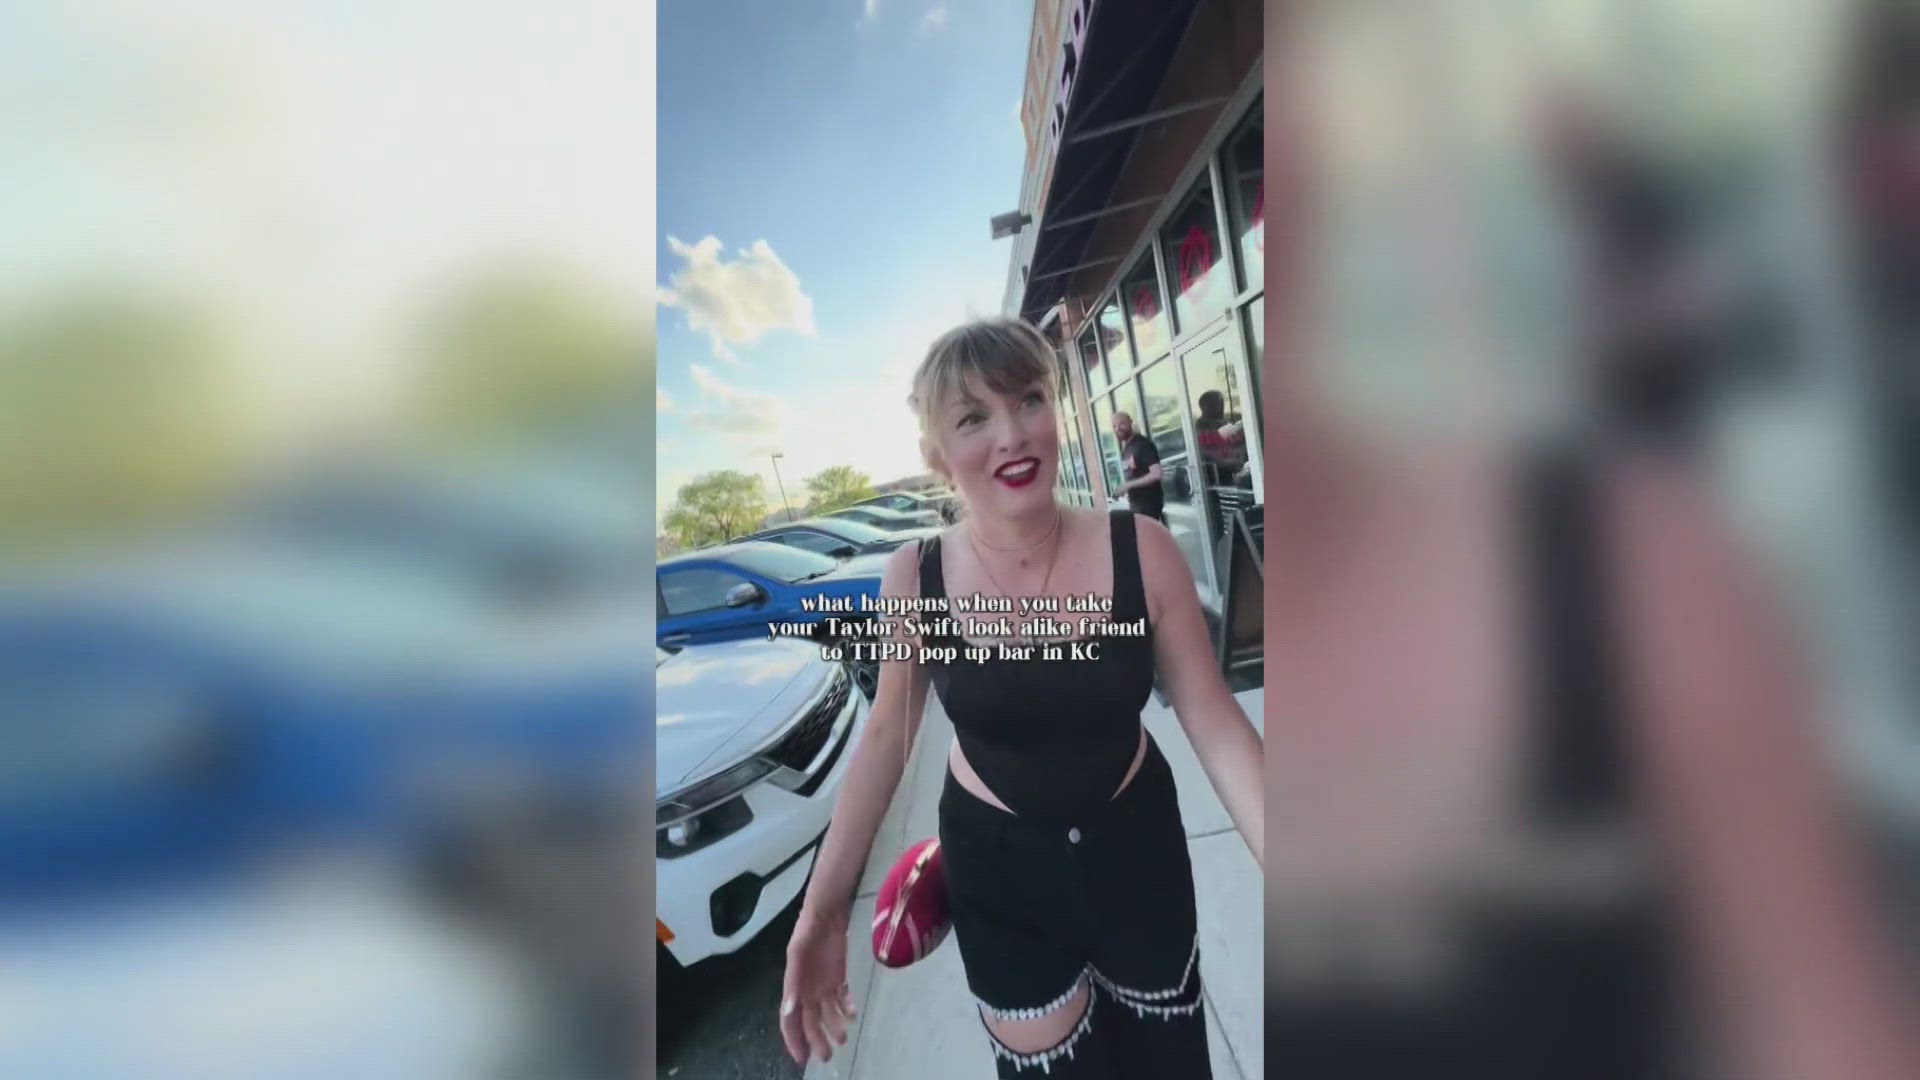 Anchor Leslie Spoon has a story on a Taylor Swift look-a-like, who, lives in Kansas, so now her life is crazy.